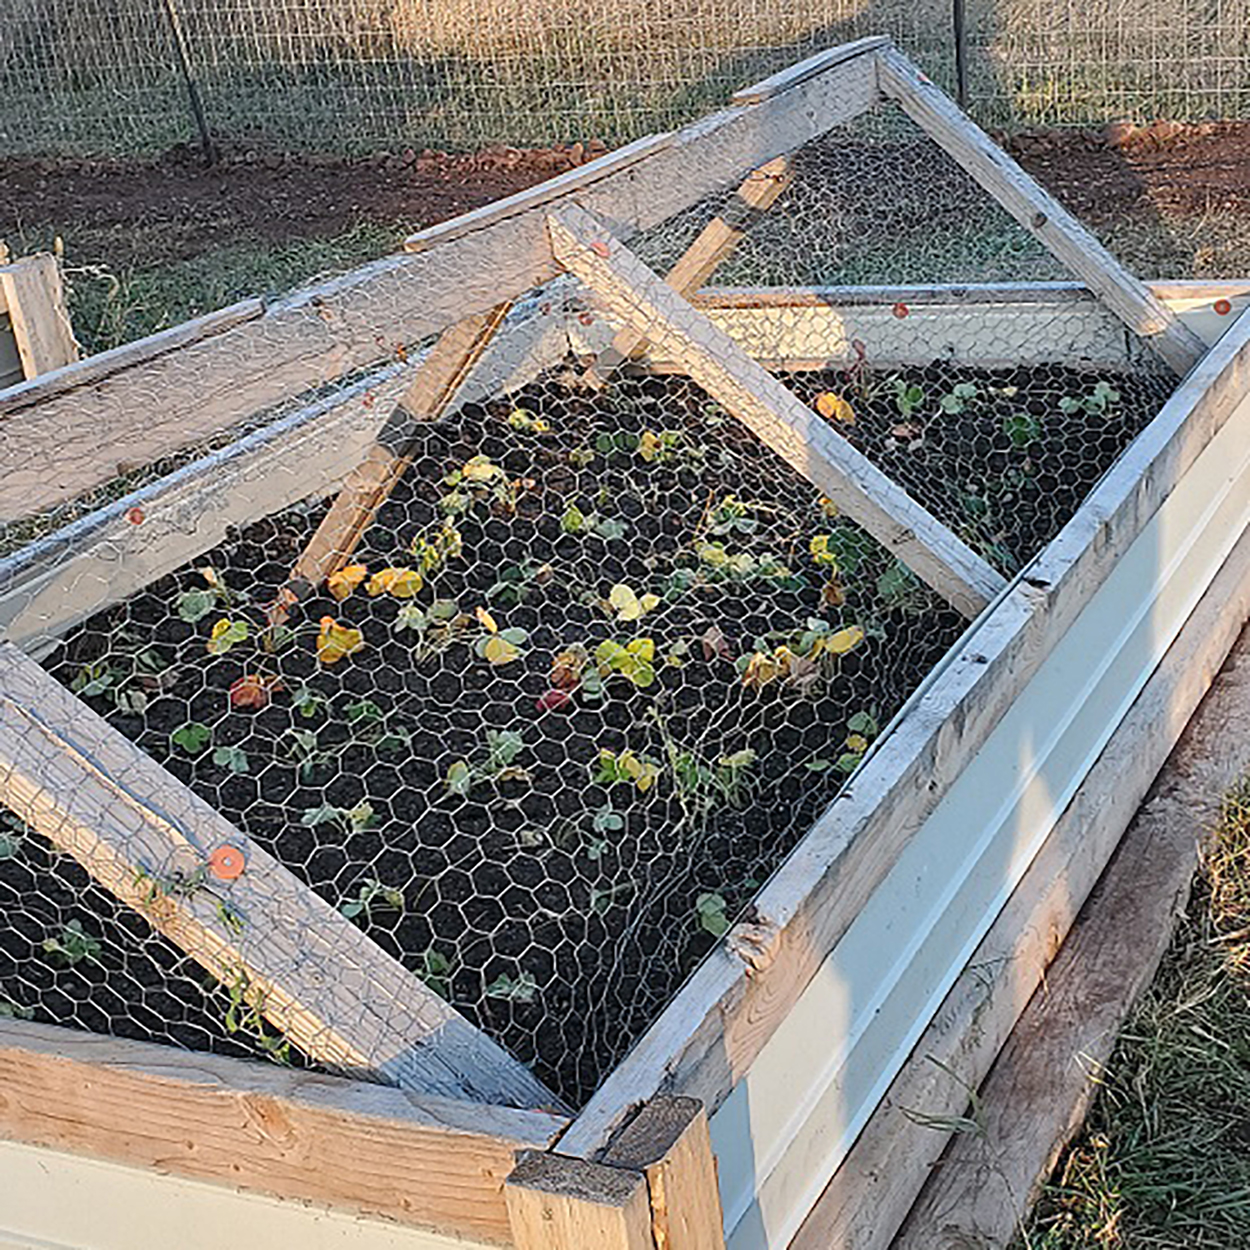 Wire cage over raised bed garden.